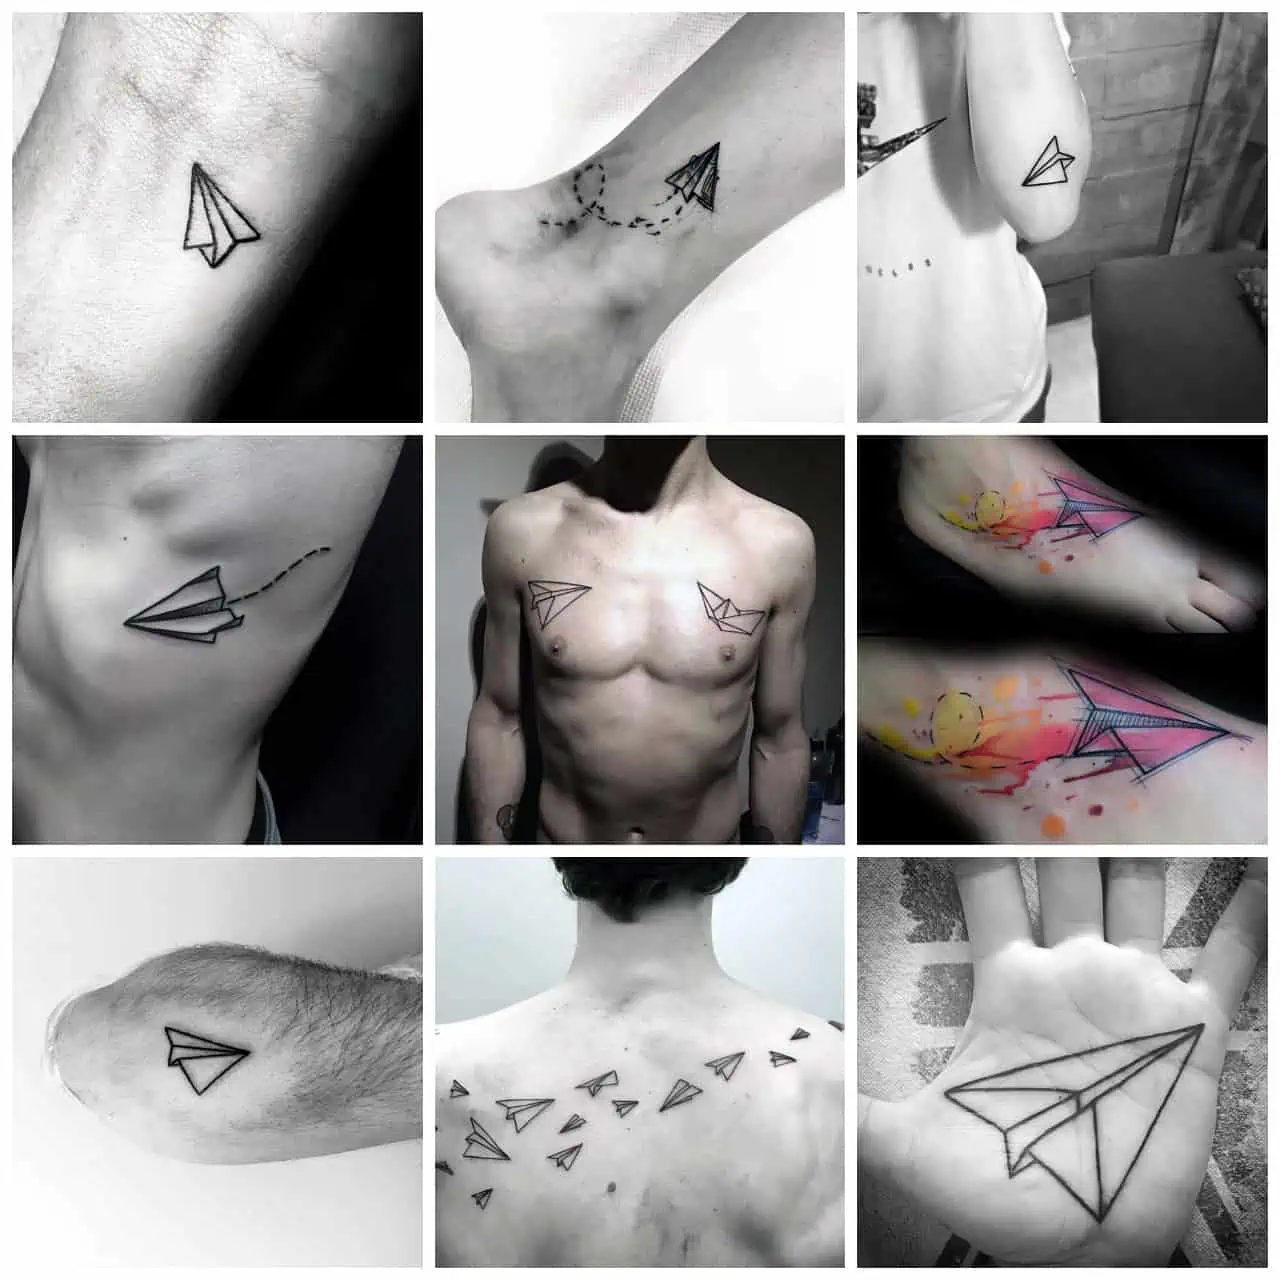 Paper Airplane Tattoos for Men